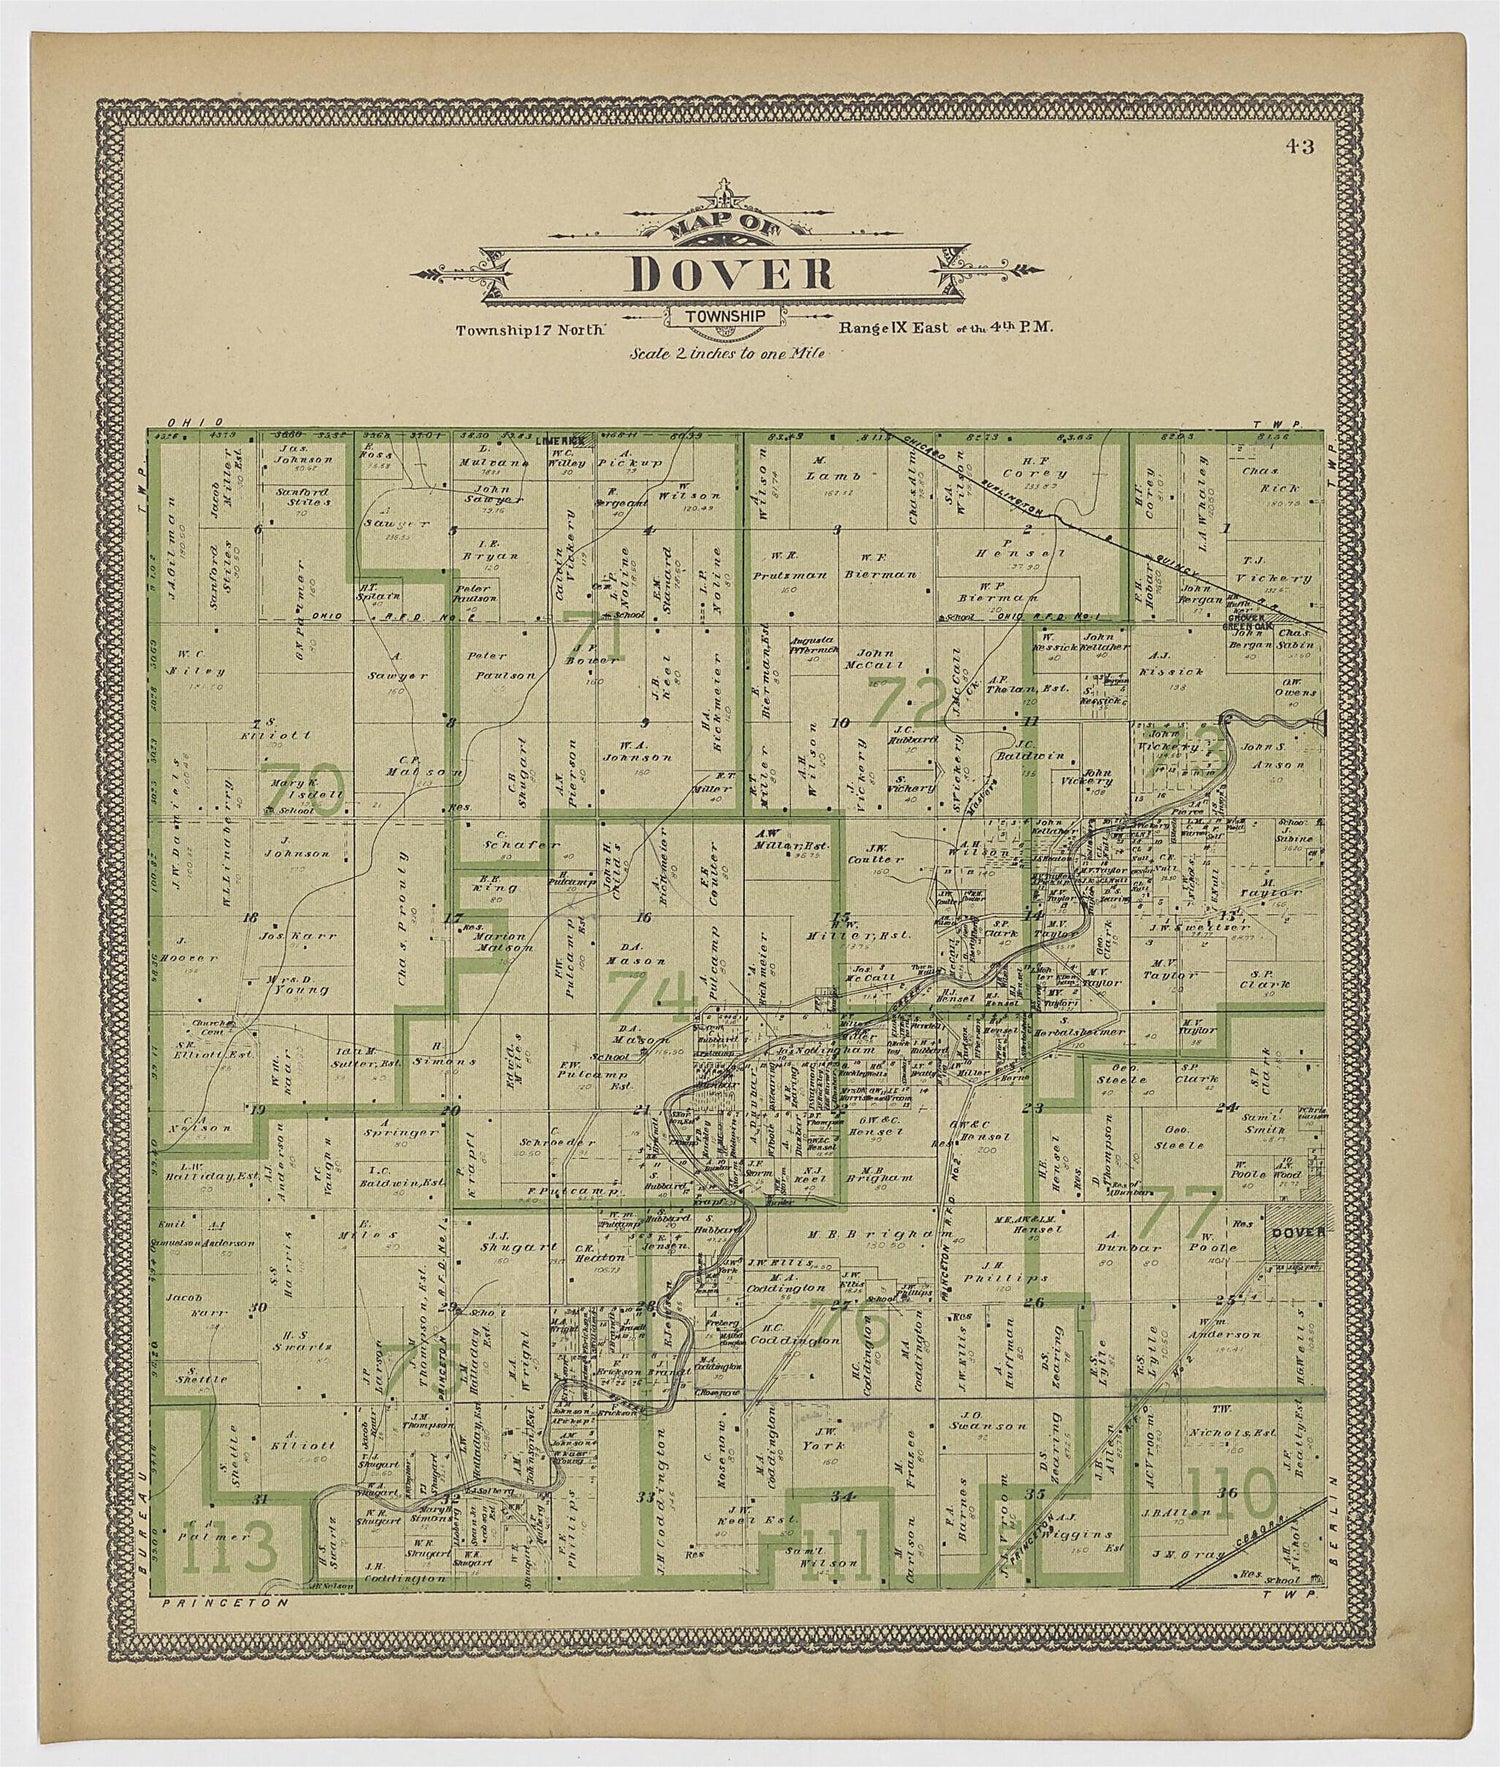 This old map of Image 25 of 20th Century Atlas of Bureau County, Illinois from Atlas of Bureau County, Illinois from 1905 was created by  Middle-West Publishing Co in 1905